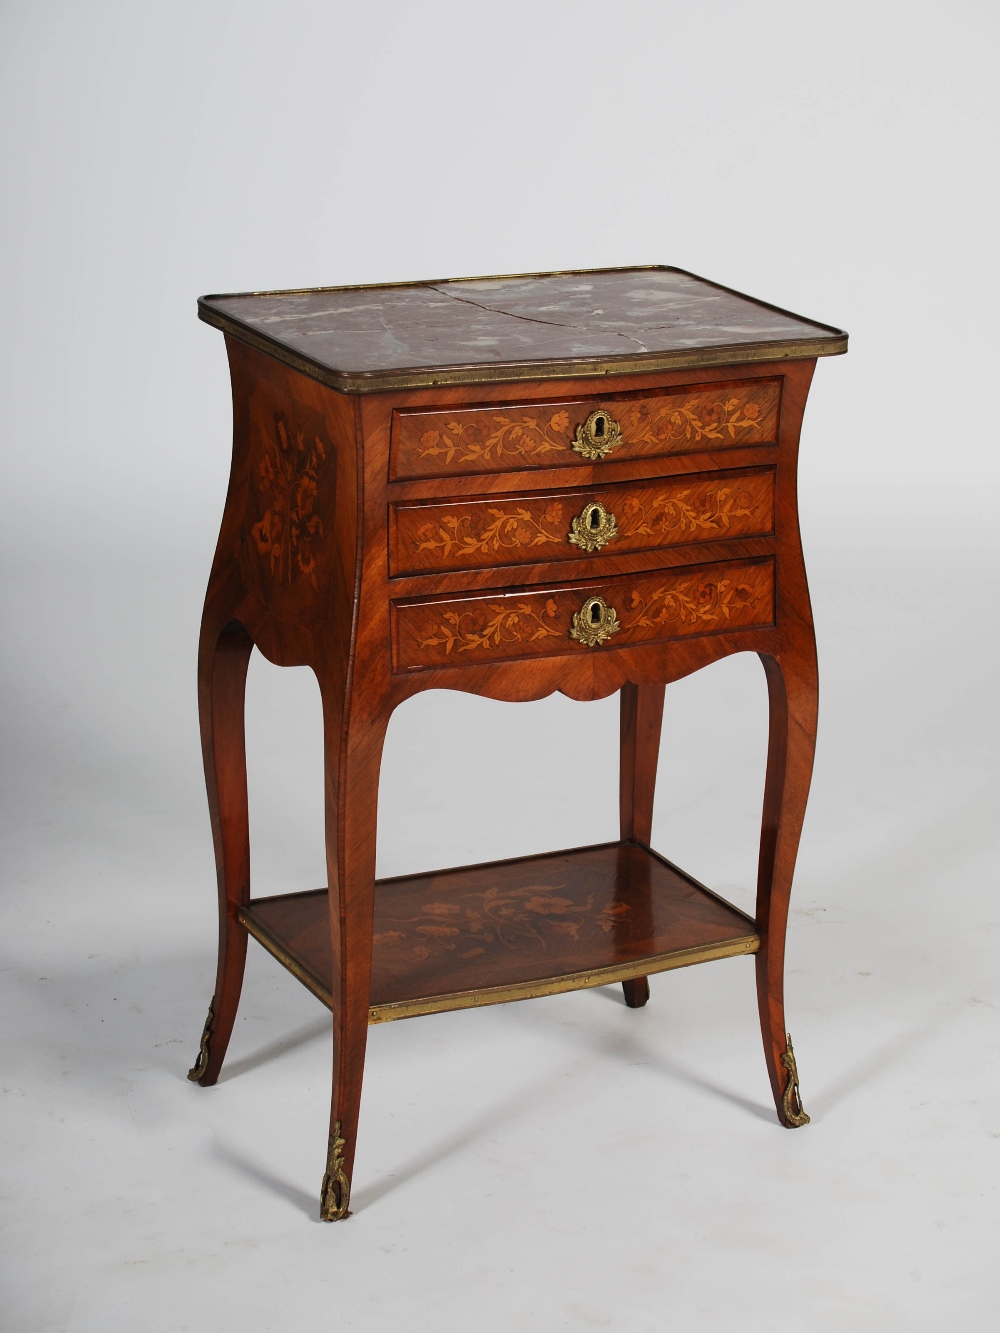 A late 19th century kingwood, marquetry inlaid and gilt metal mounted side table, the rectangular